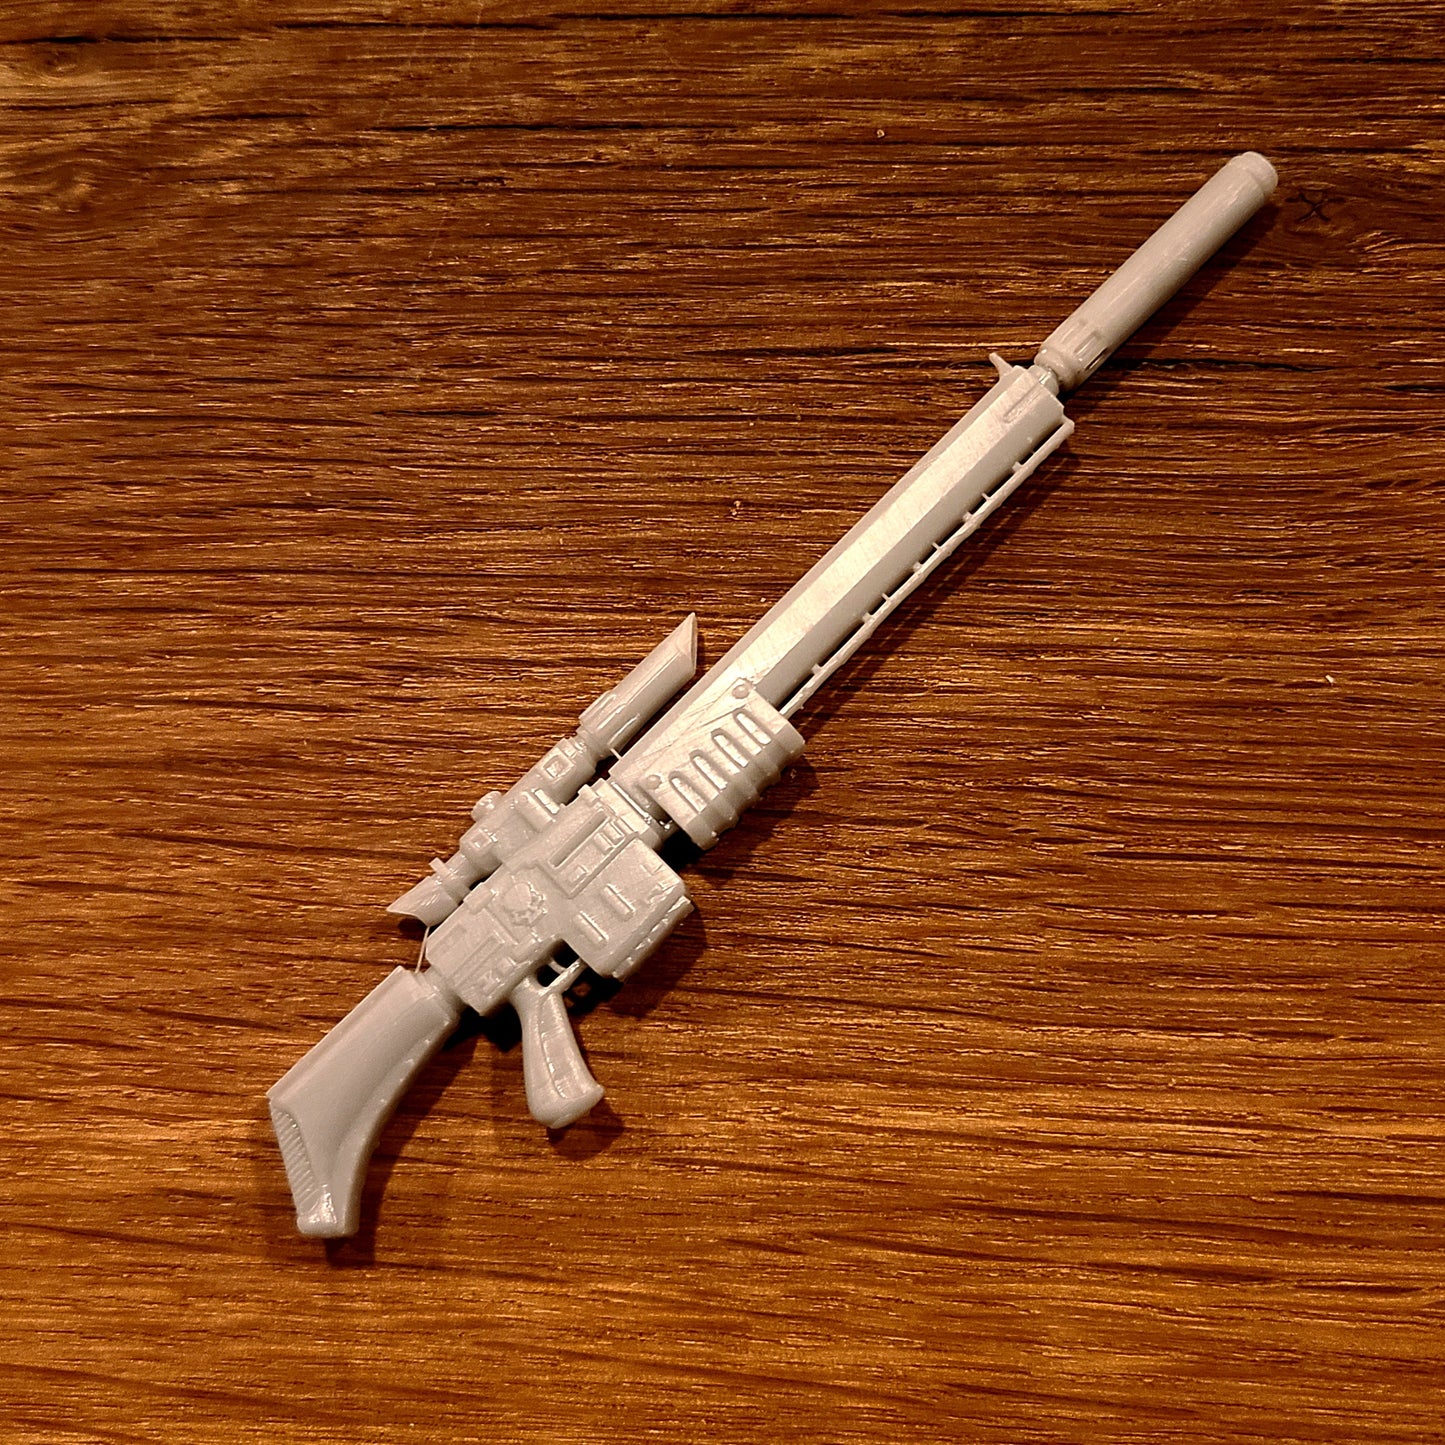 G.I. Joe Classified Action Figures Sniper Rifle with Suppressor